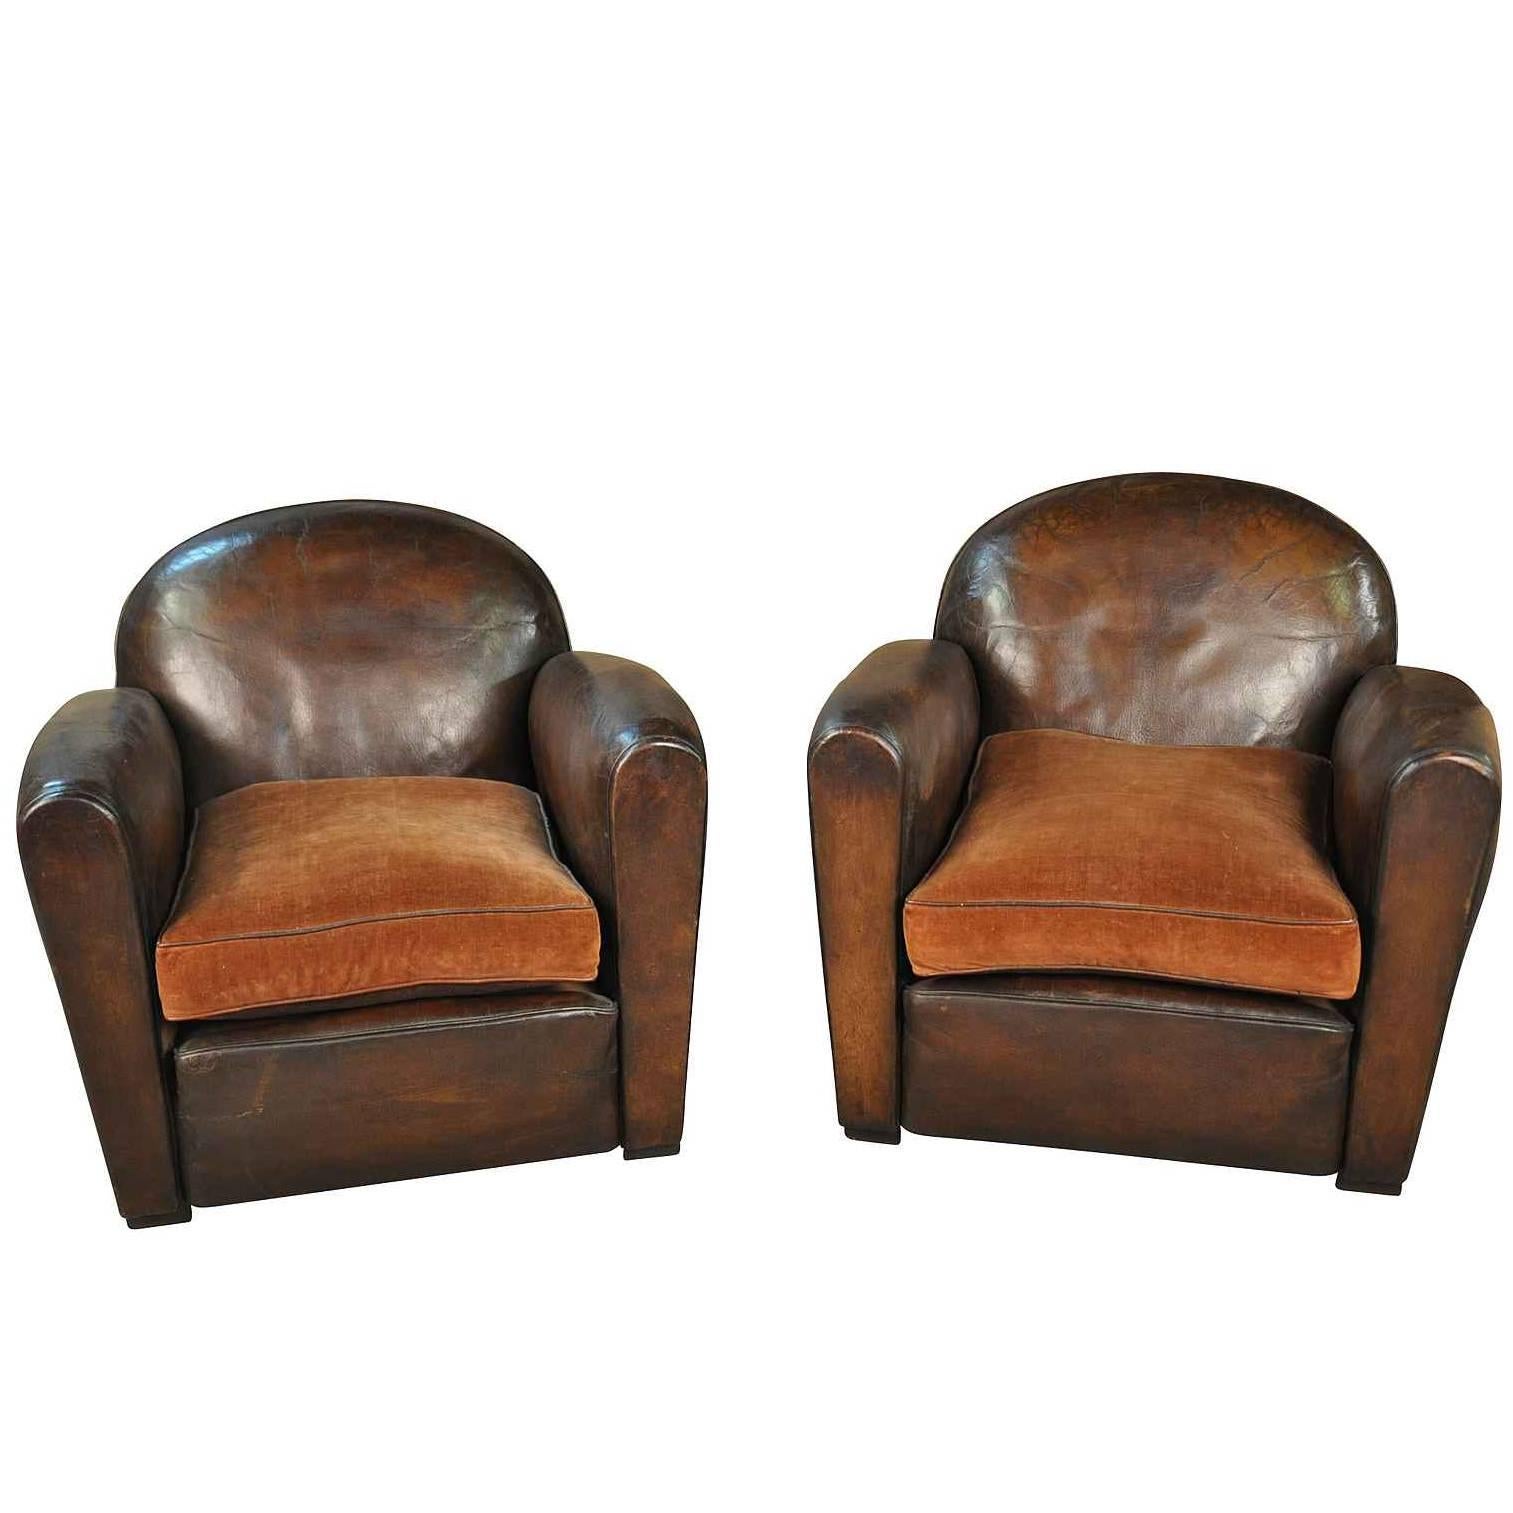 Sensational Pair of French Art Deco Leather Club Chairs